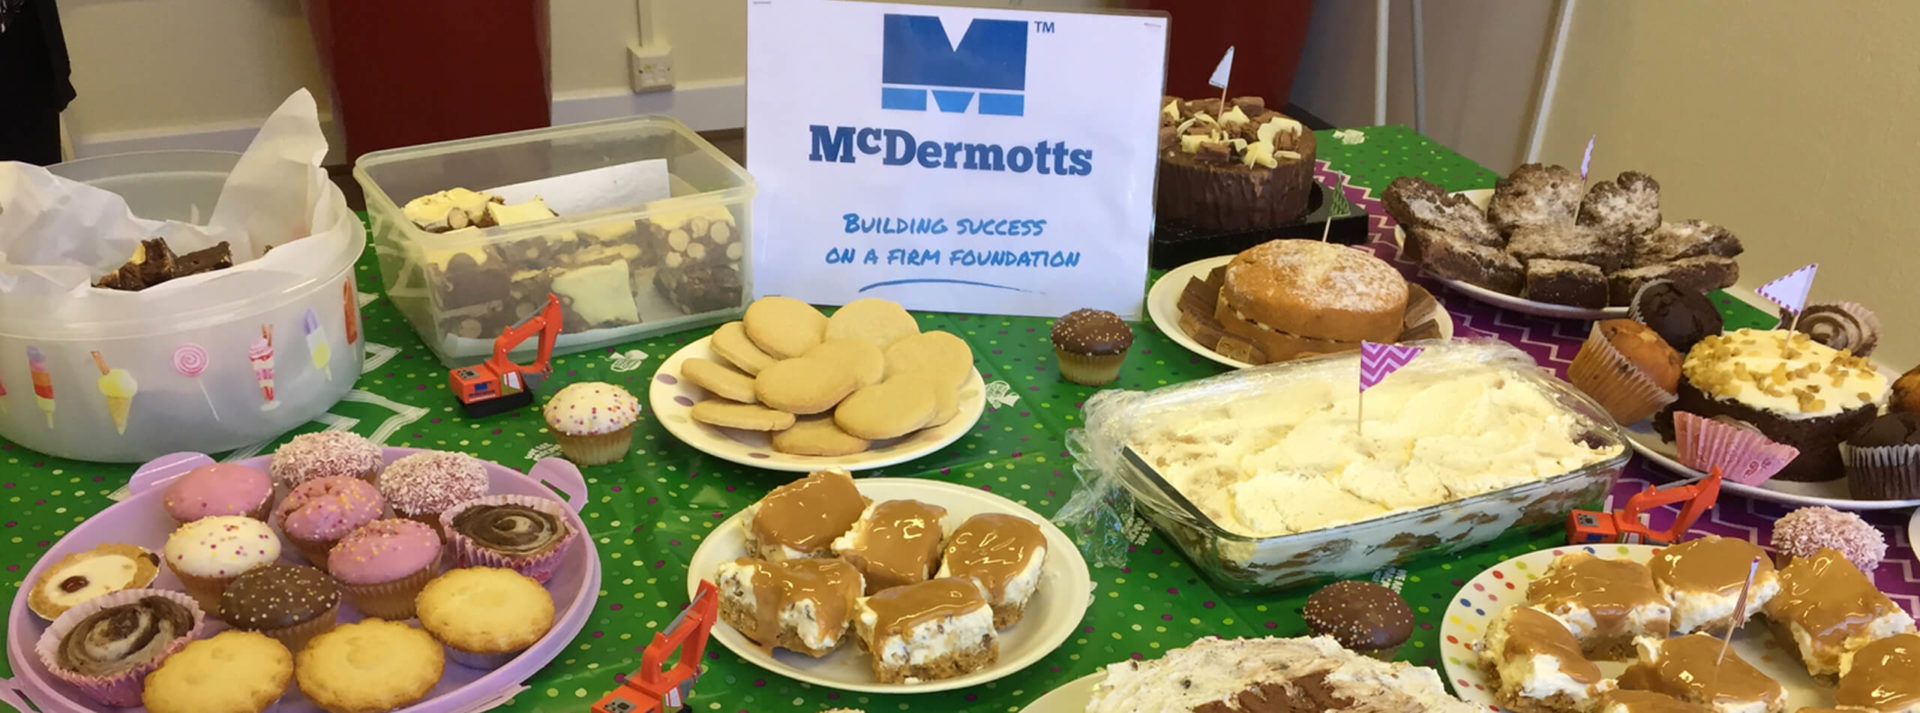 We took part in our first Macmillan Coffee Morning today and raised £600.